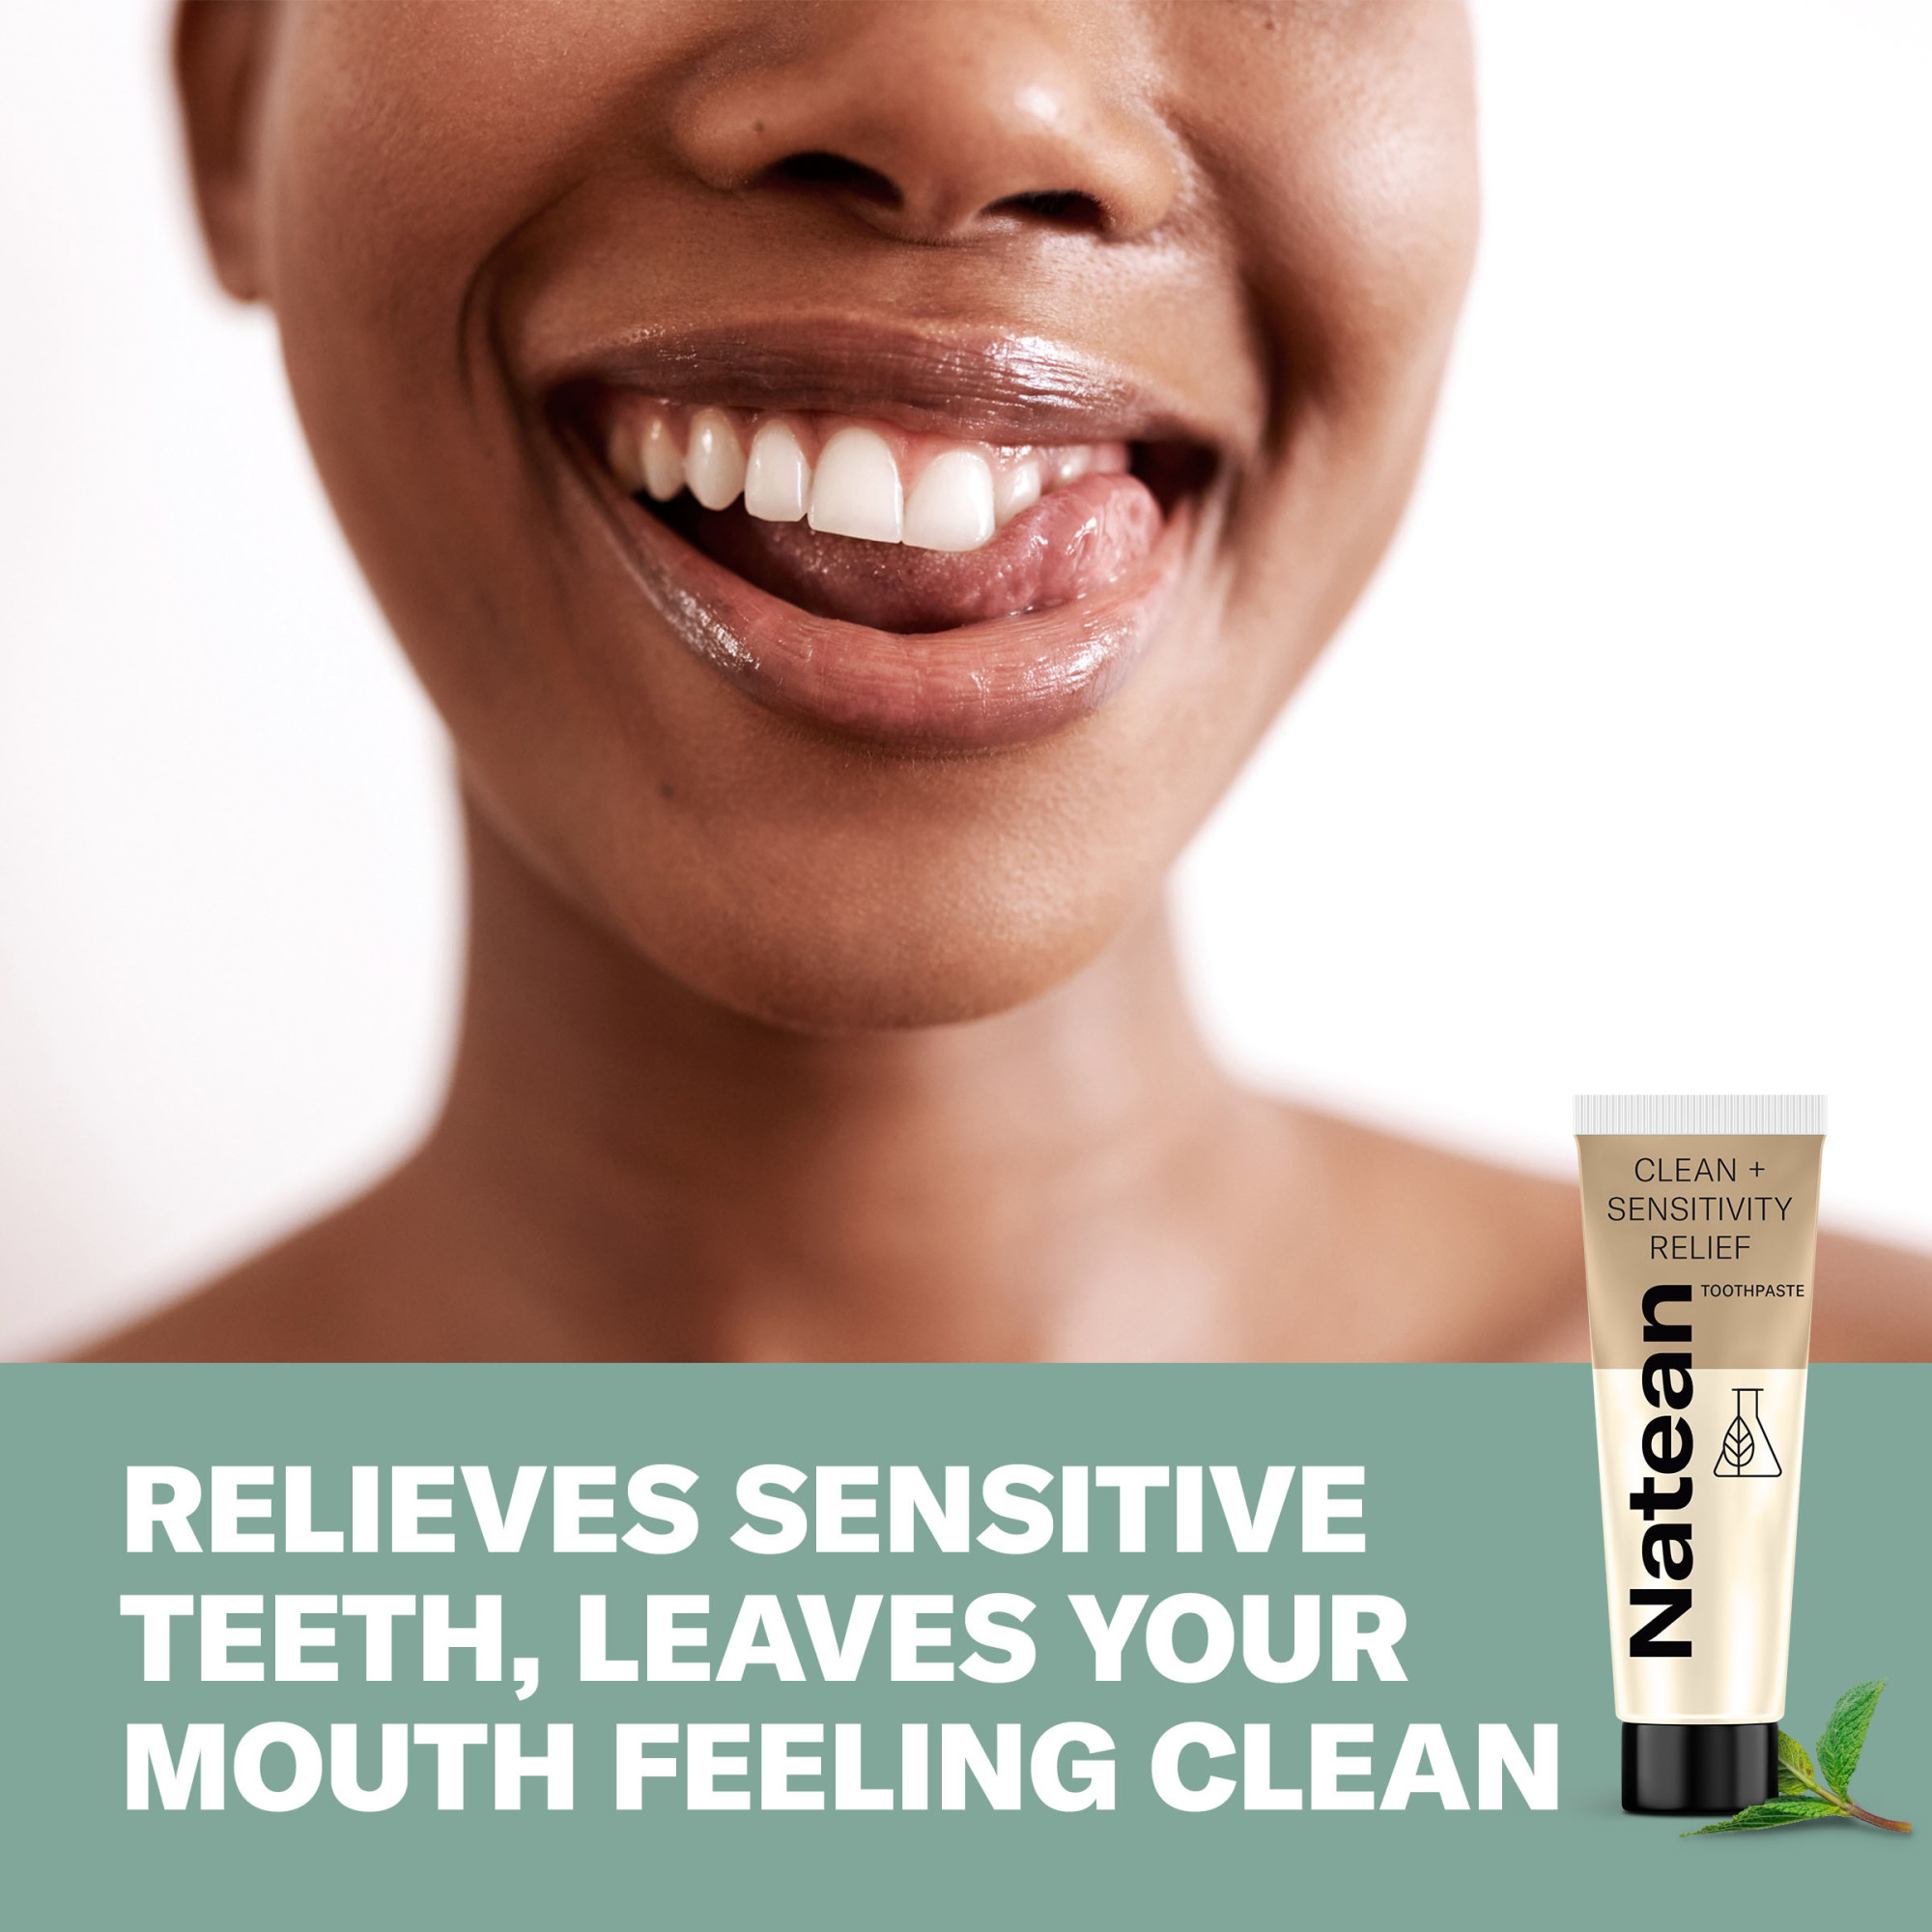 Natean Clean + Sensitivity Relief Toothpaste for Sensitive Teeth and Cavity Prevention, Soothing Mint - 4.7 oz Tube - image 5 of 9